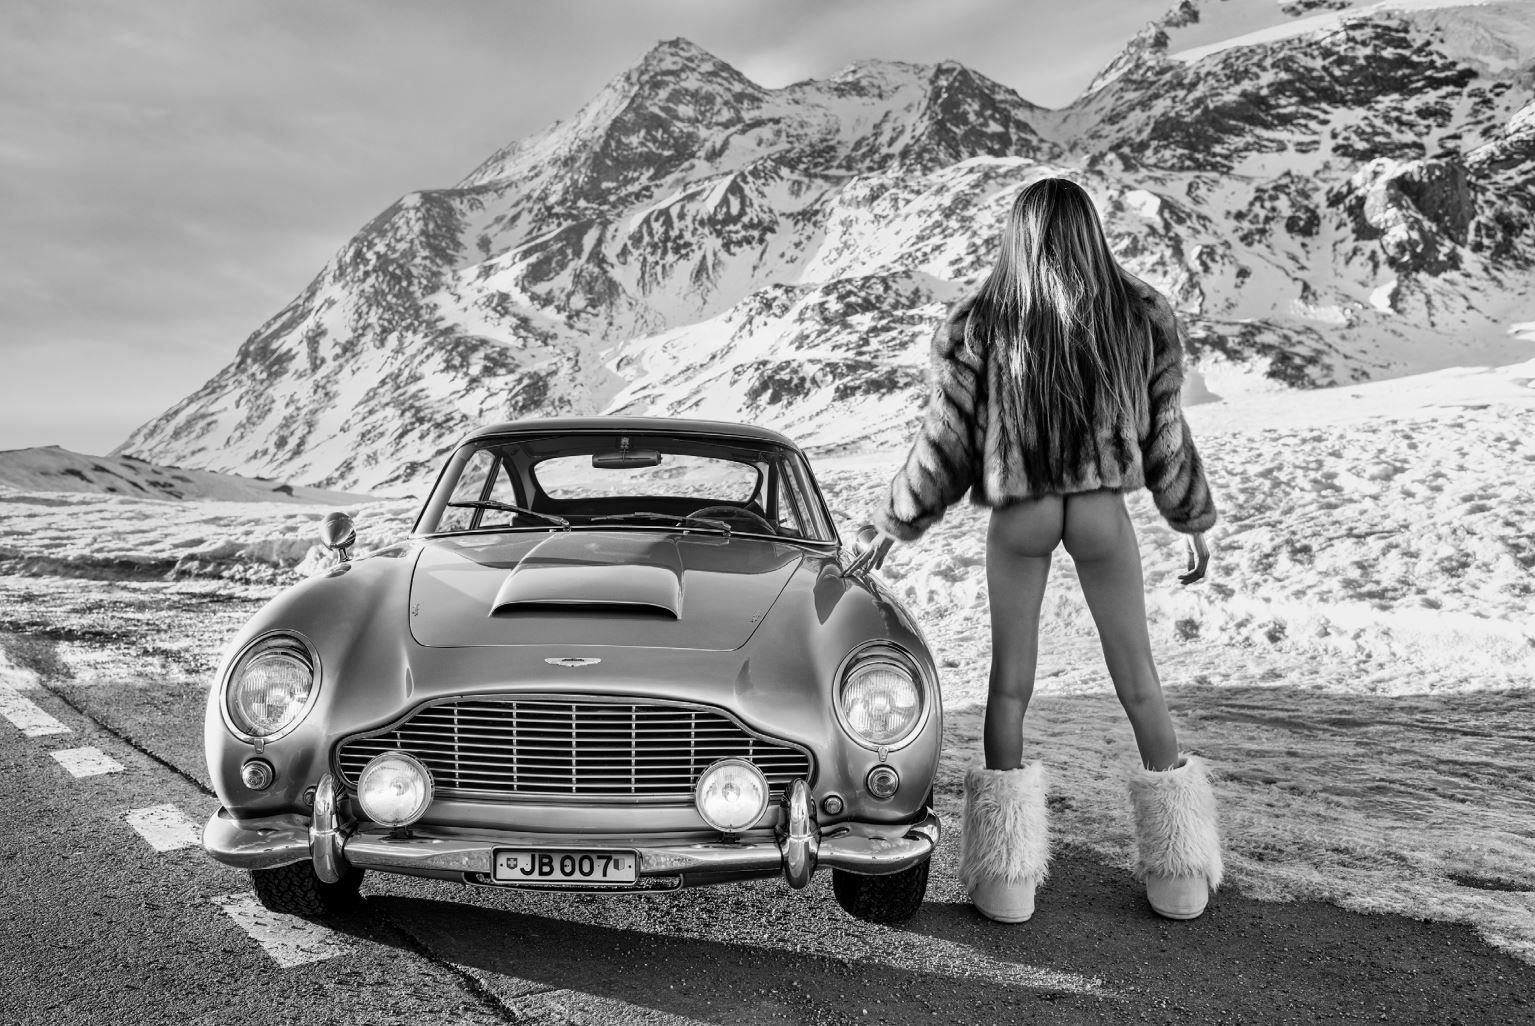 David Yarrow Figurative Photograph - James? - b&w photograph showing a nude model from behind with a James Bond car